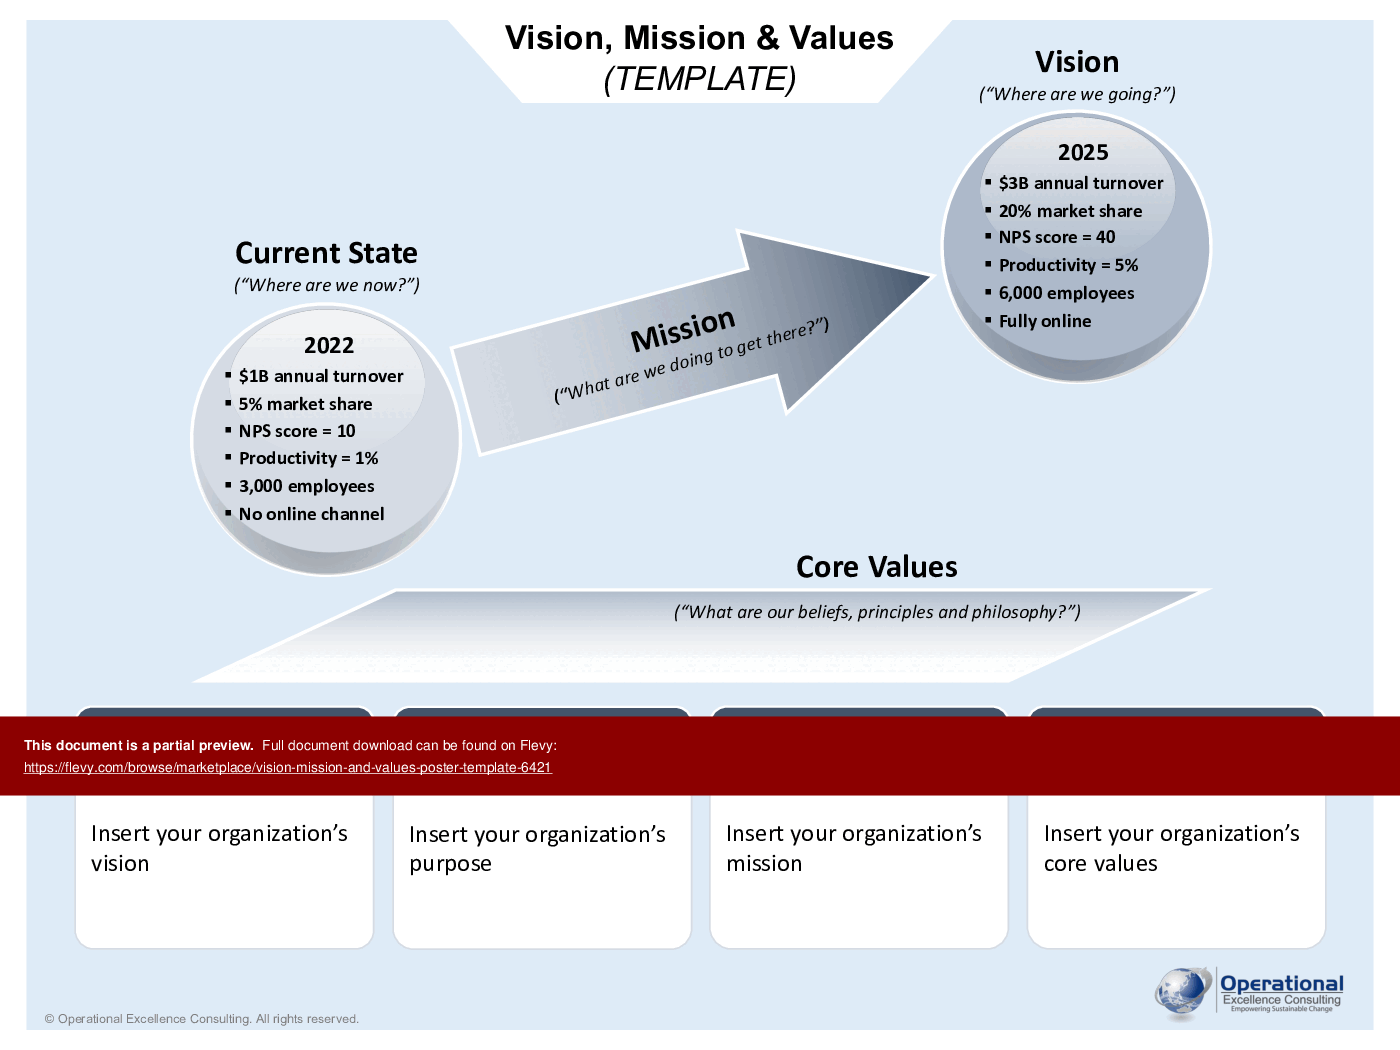 This is a partial preview of Vision, Mission & Values Poster/Template (5-page PDF document). Full document is 5 pages. 